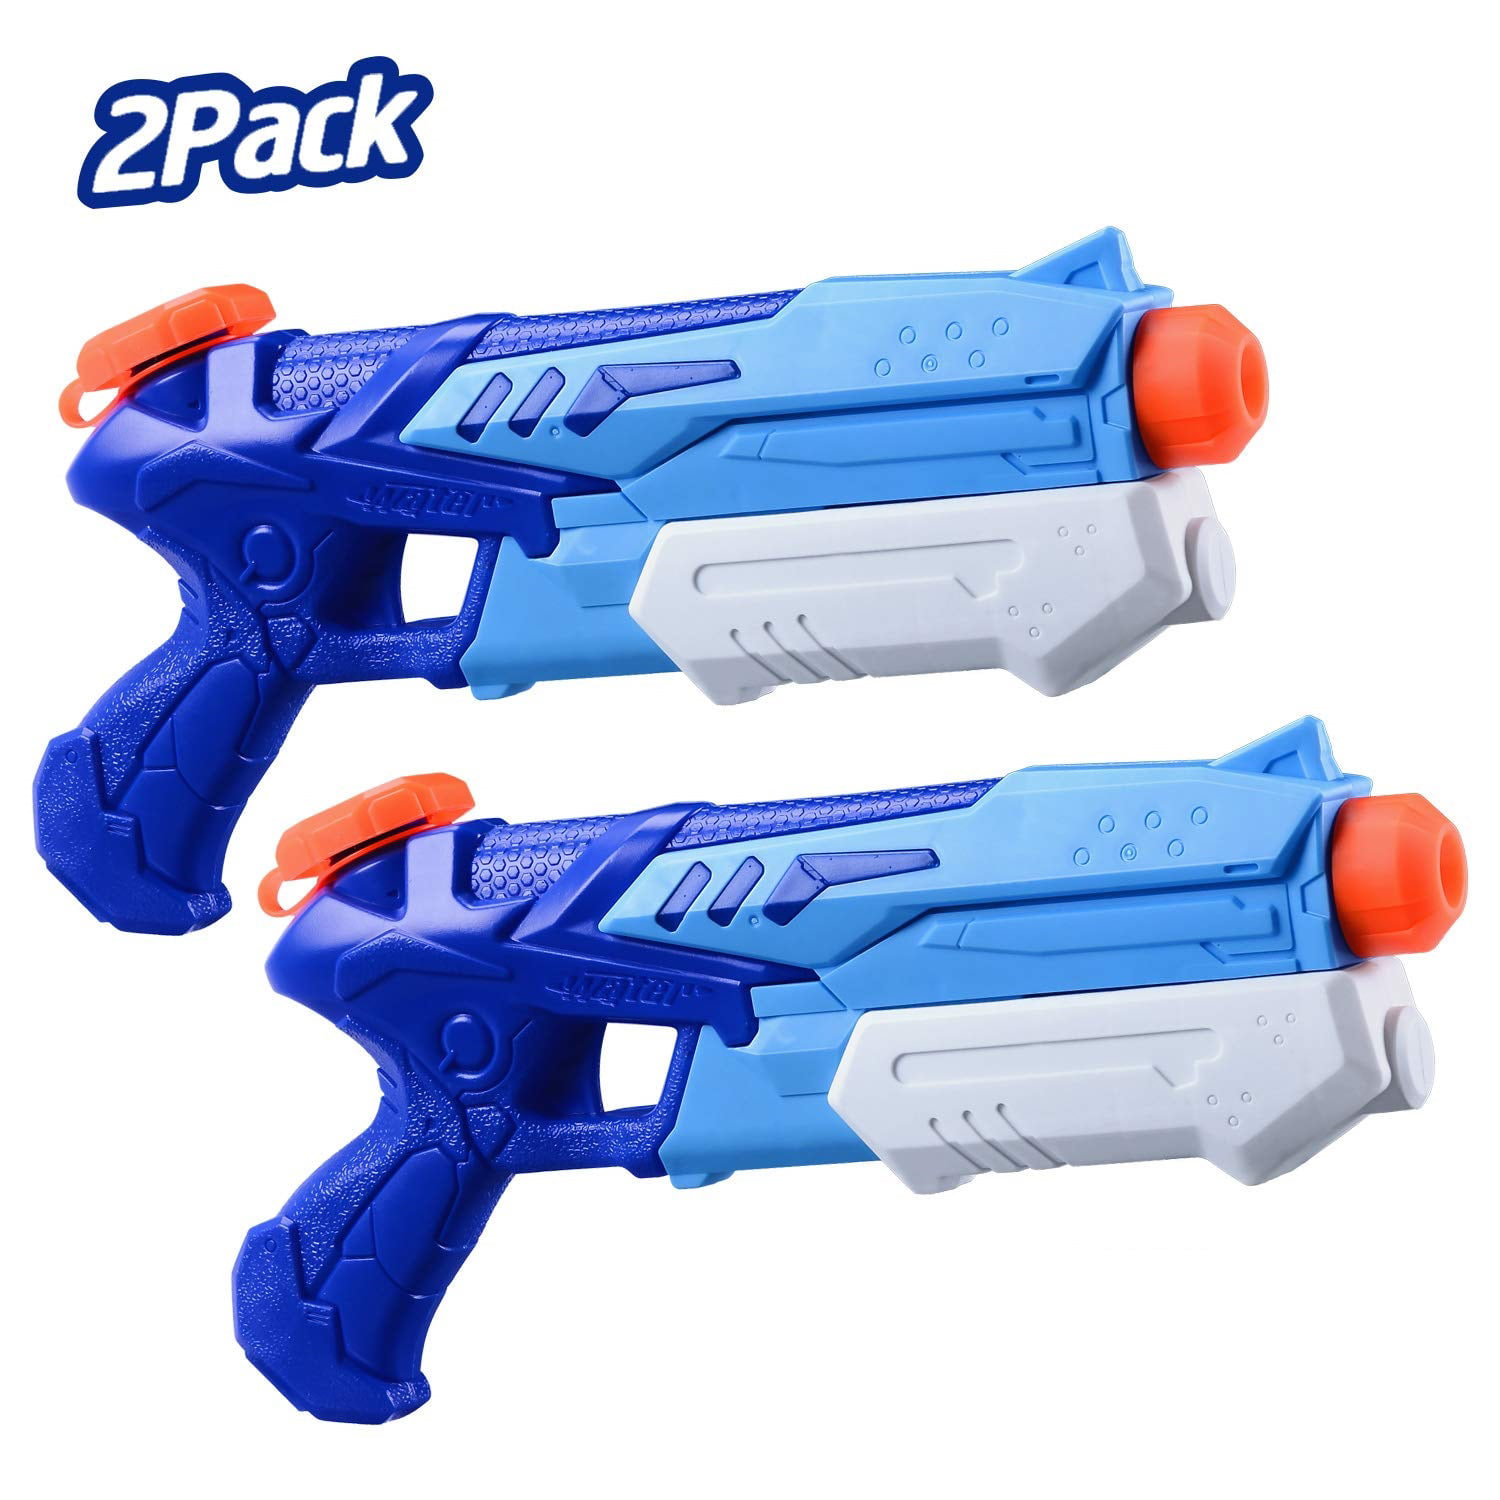 1200CC High Capacity & 35 Feet Long Shooting Range Water Blasters Gift Toys for Summer Swimming Pool Beach Sand Outdoor Water Fighting